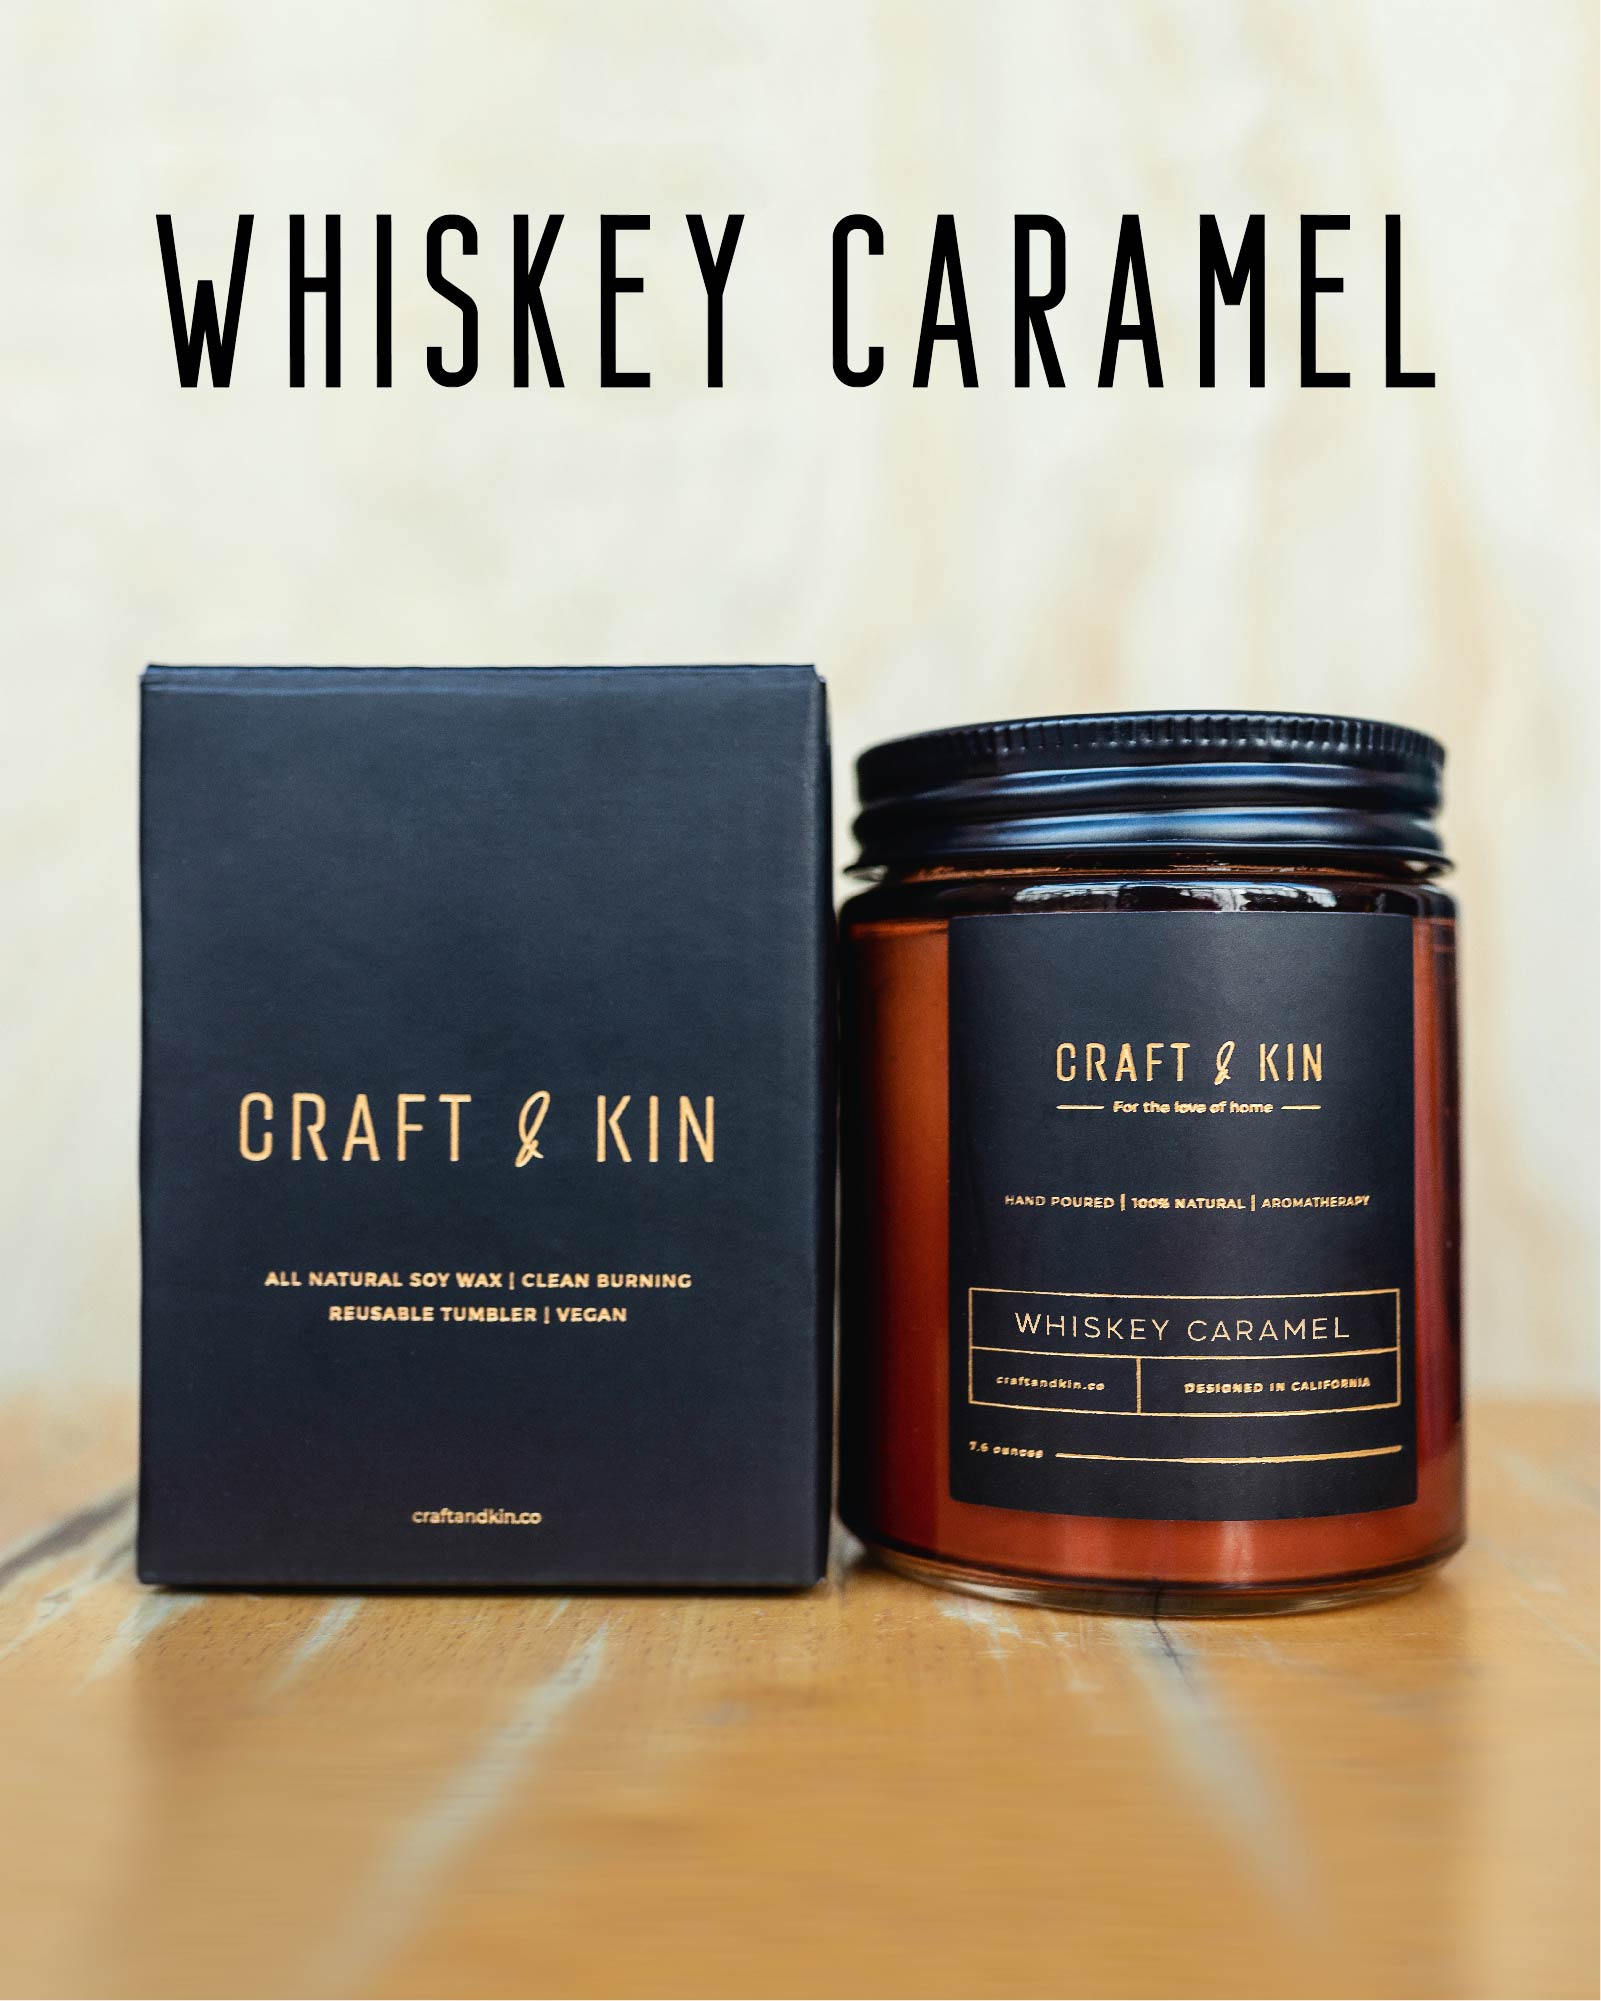 Scented Candles for Men | Premium Whiskey Caramel Scented Candle | All-Natural Whiskey Candle Soy Candles, Rustic Home Decor Scented Candles | Non-Toxic, Ultra Clean Burn Aromatherapy Amber Jar Candle - image 4 of 5